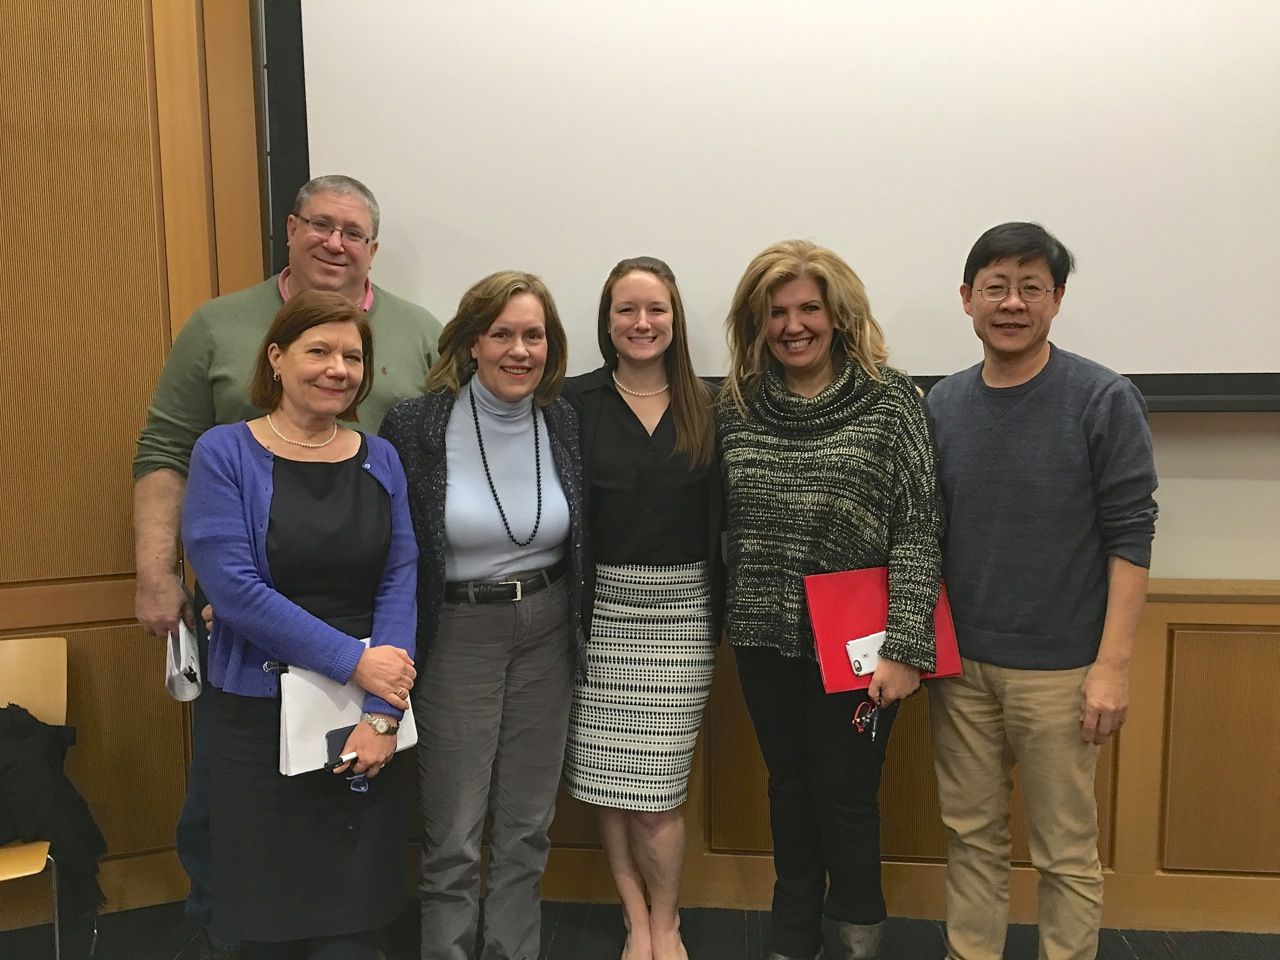 Group photo at Abby's thesis defense.